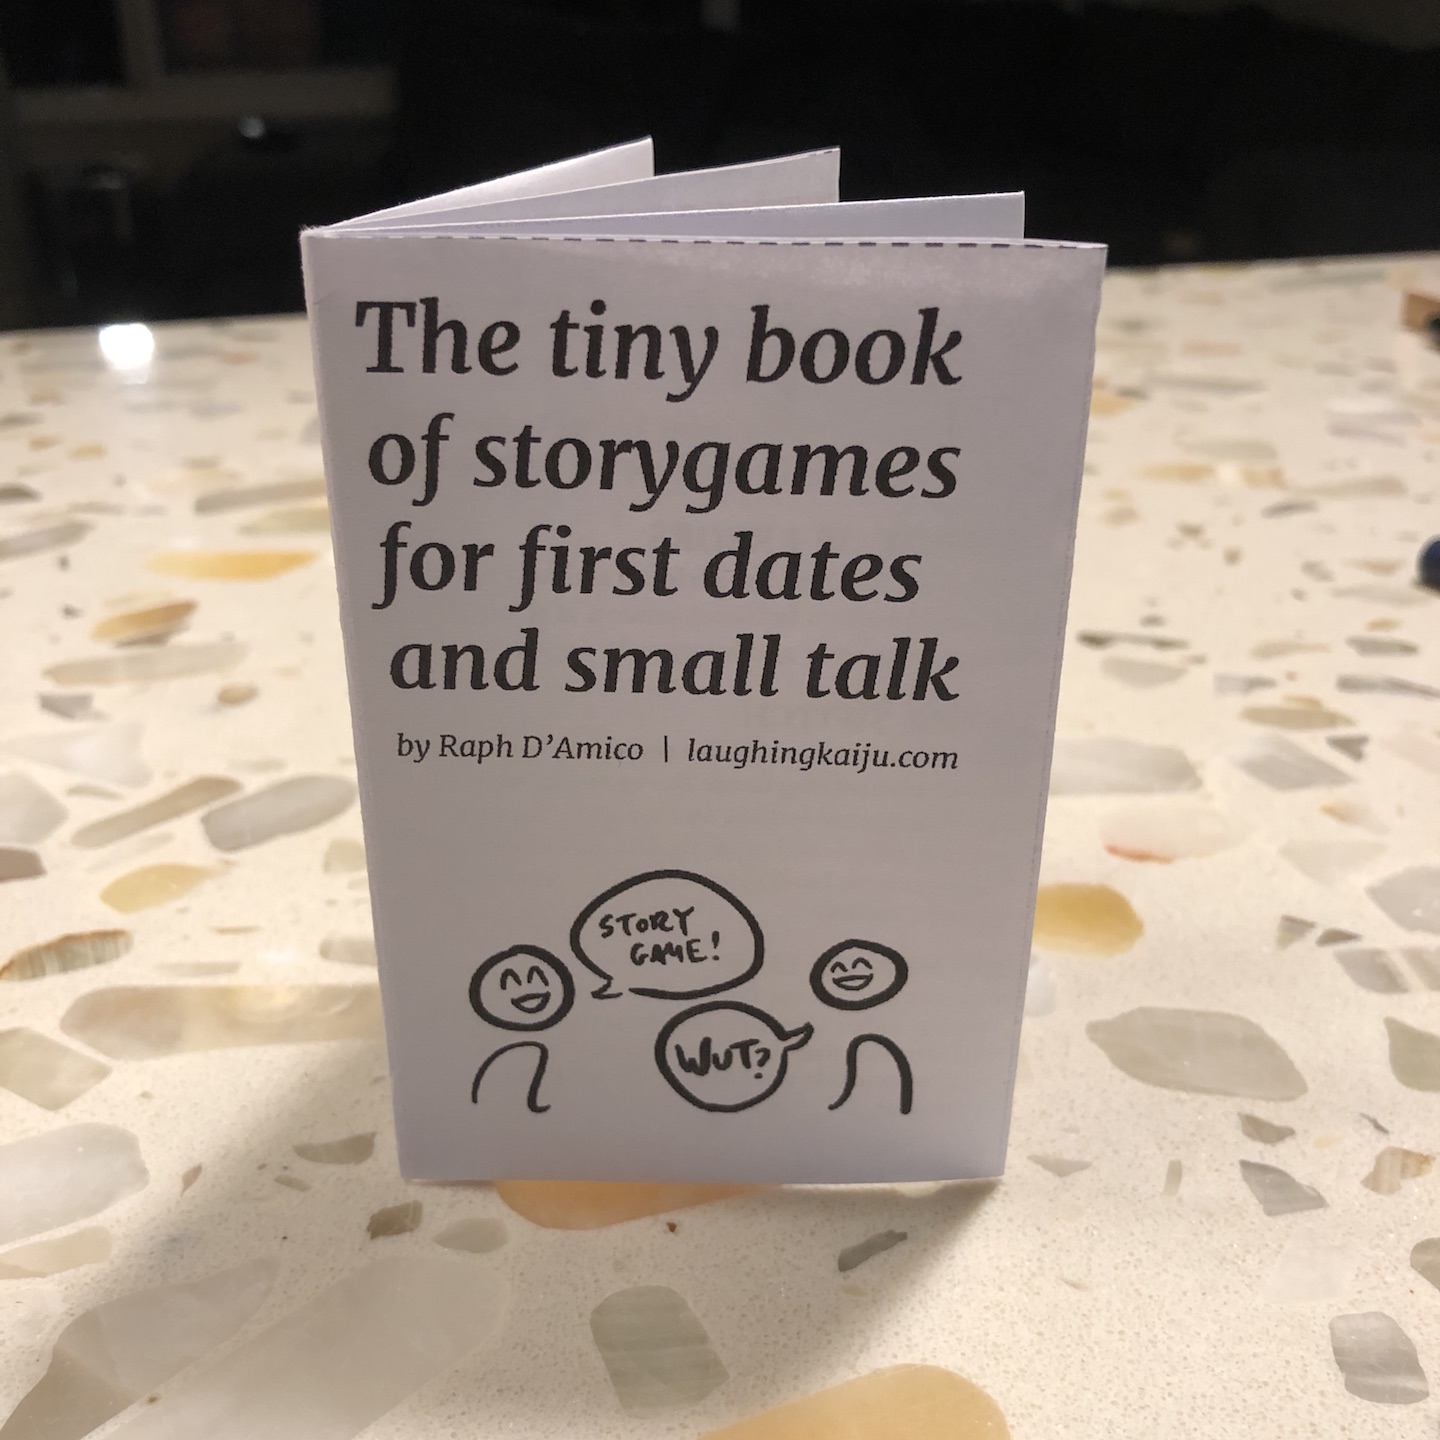 The tiny book of first date storygames